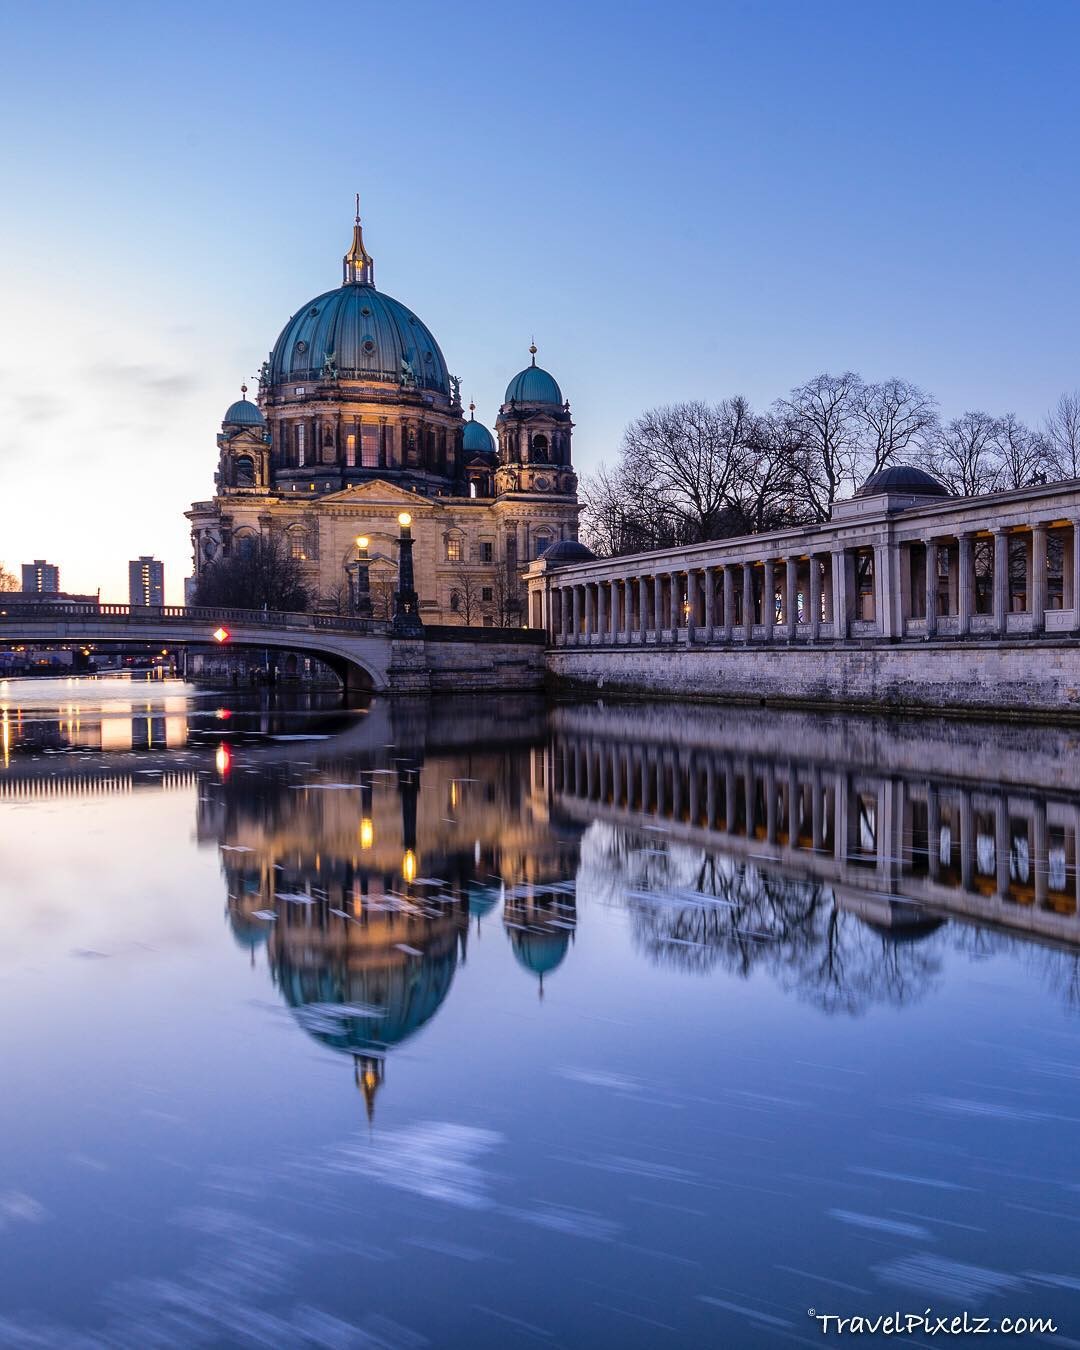 The Protestant Berlin Cathedral on Museum Island in the Mitte district is Berlin’s largest church and one of the major sights in the city centre. Photo: @travelpixelz on Instagram